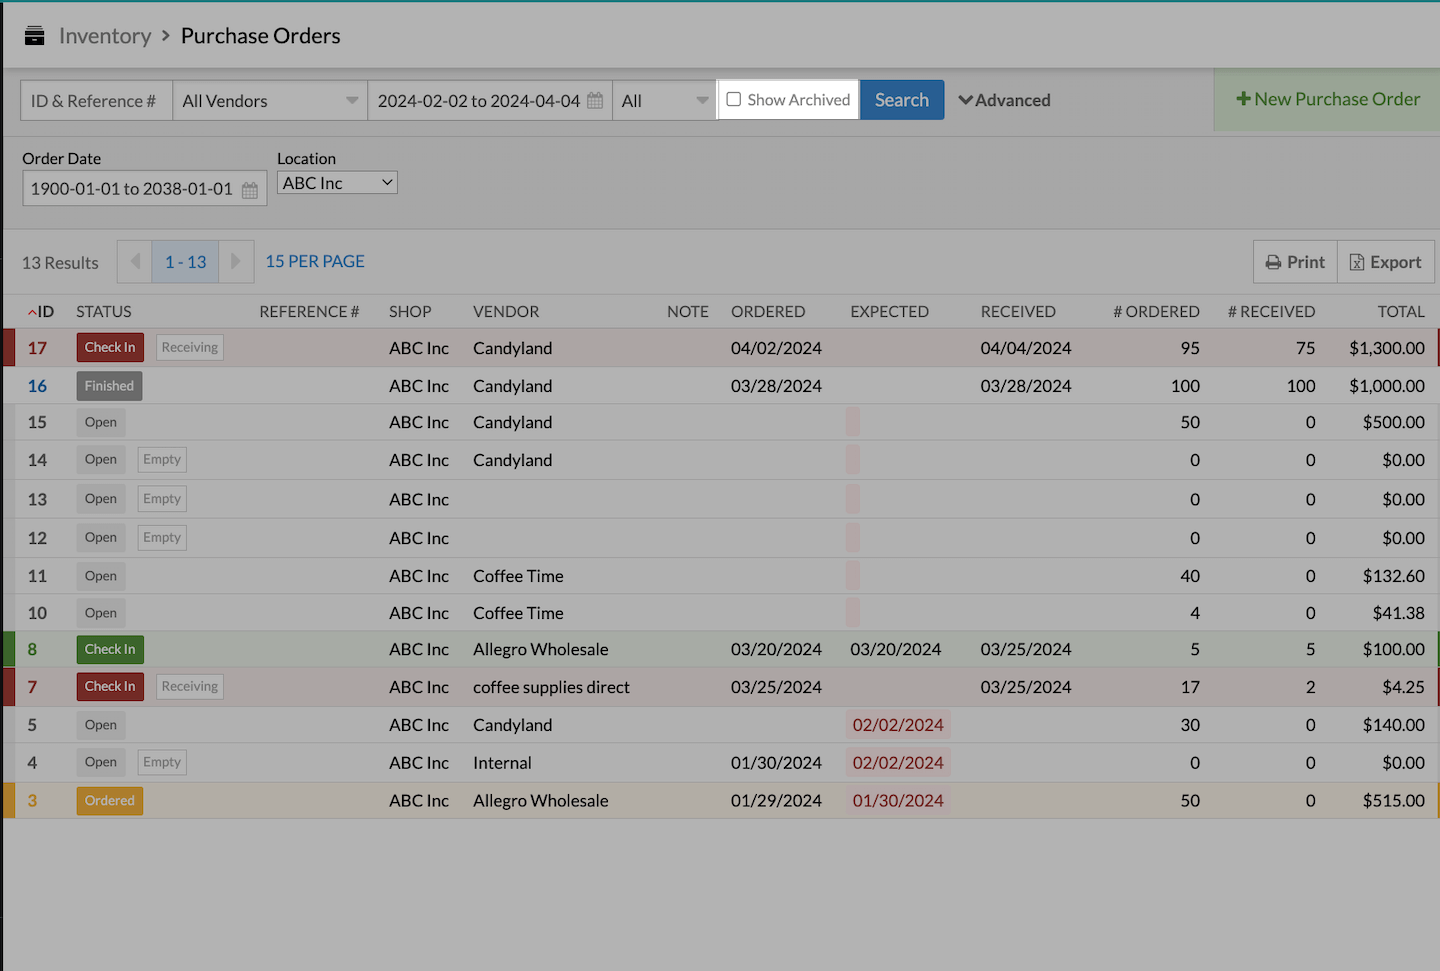 List of purchase orders, with Show Archived option emphasized.